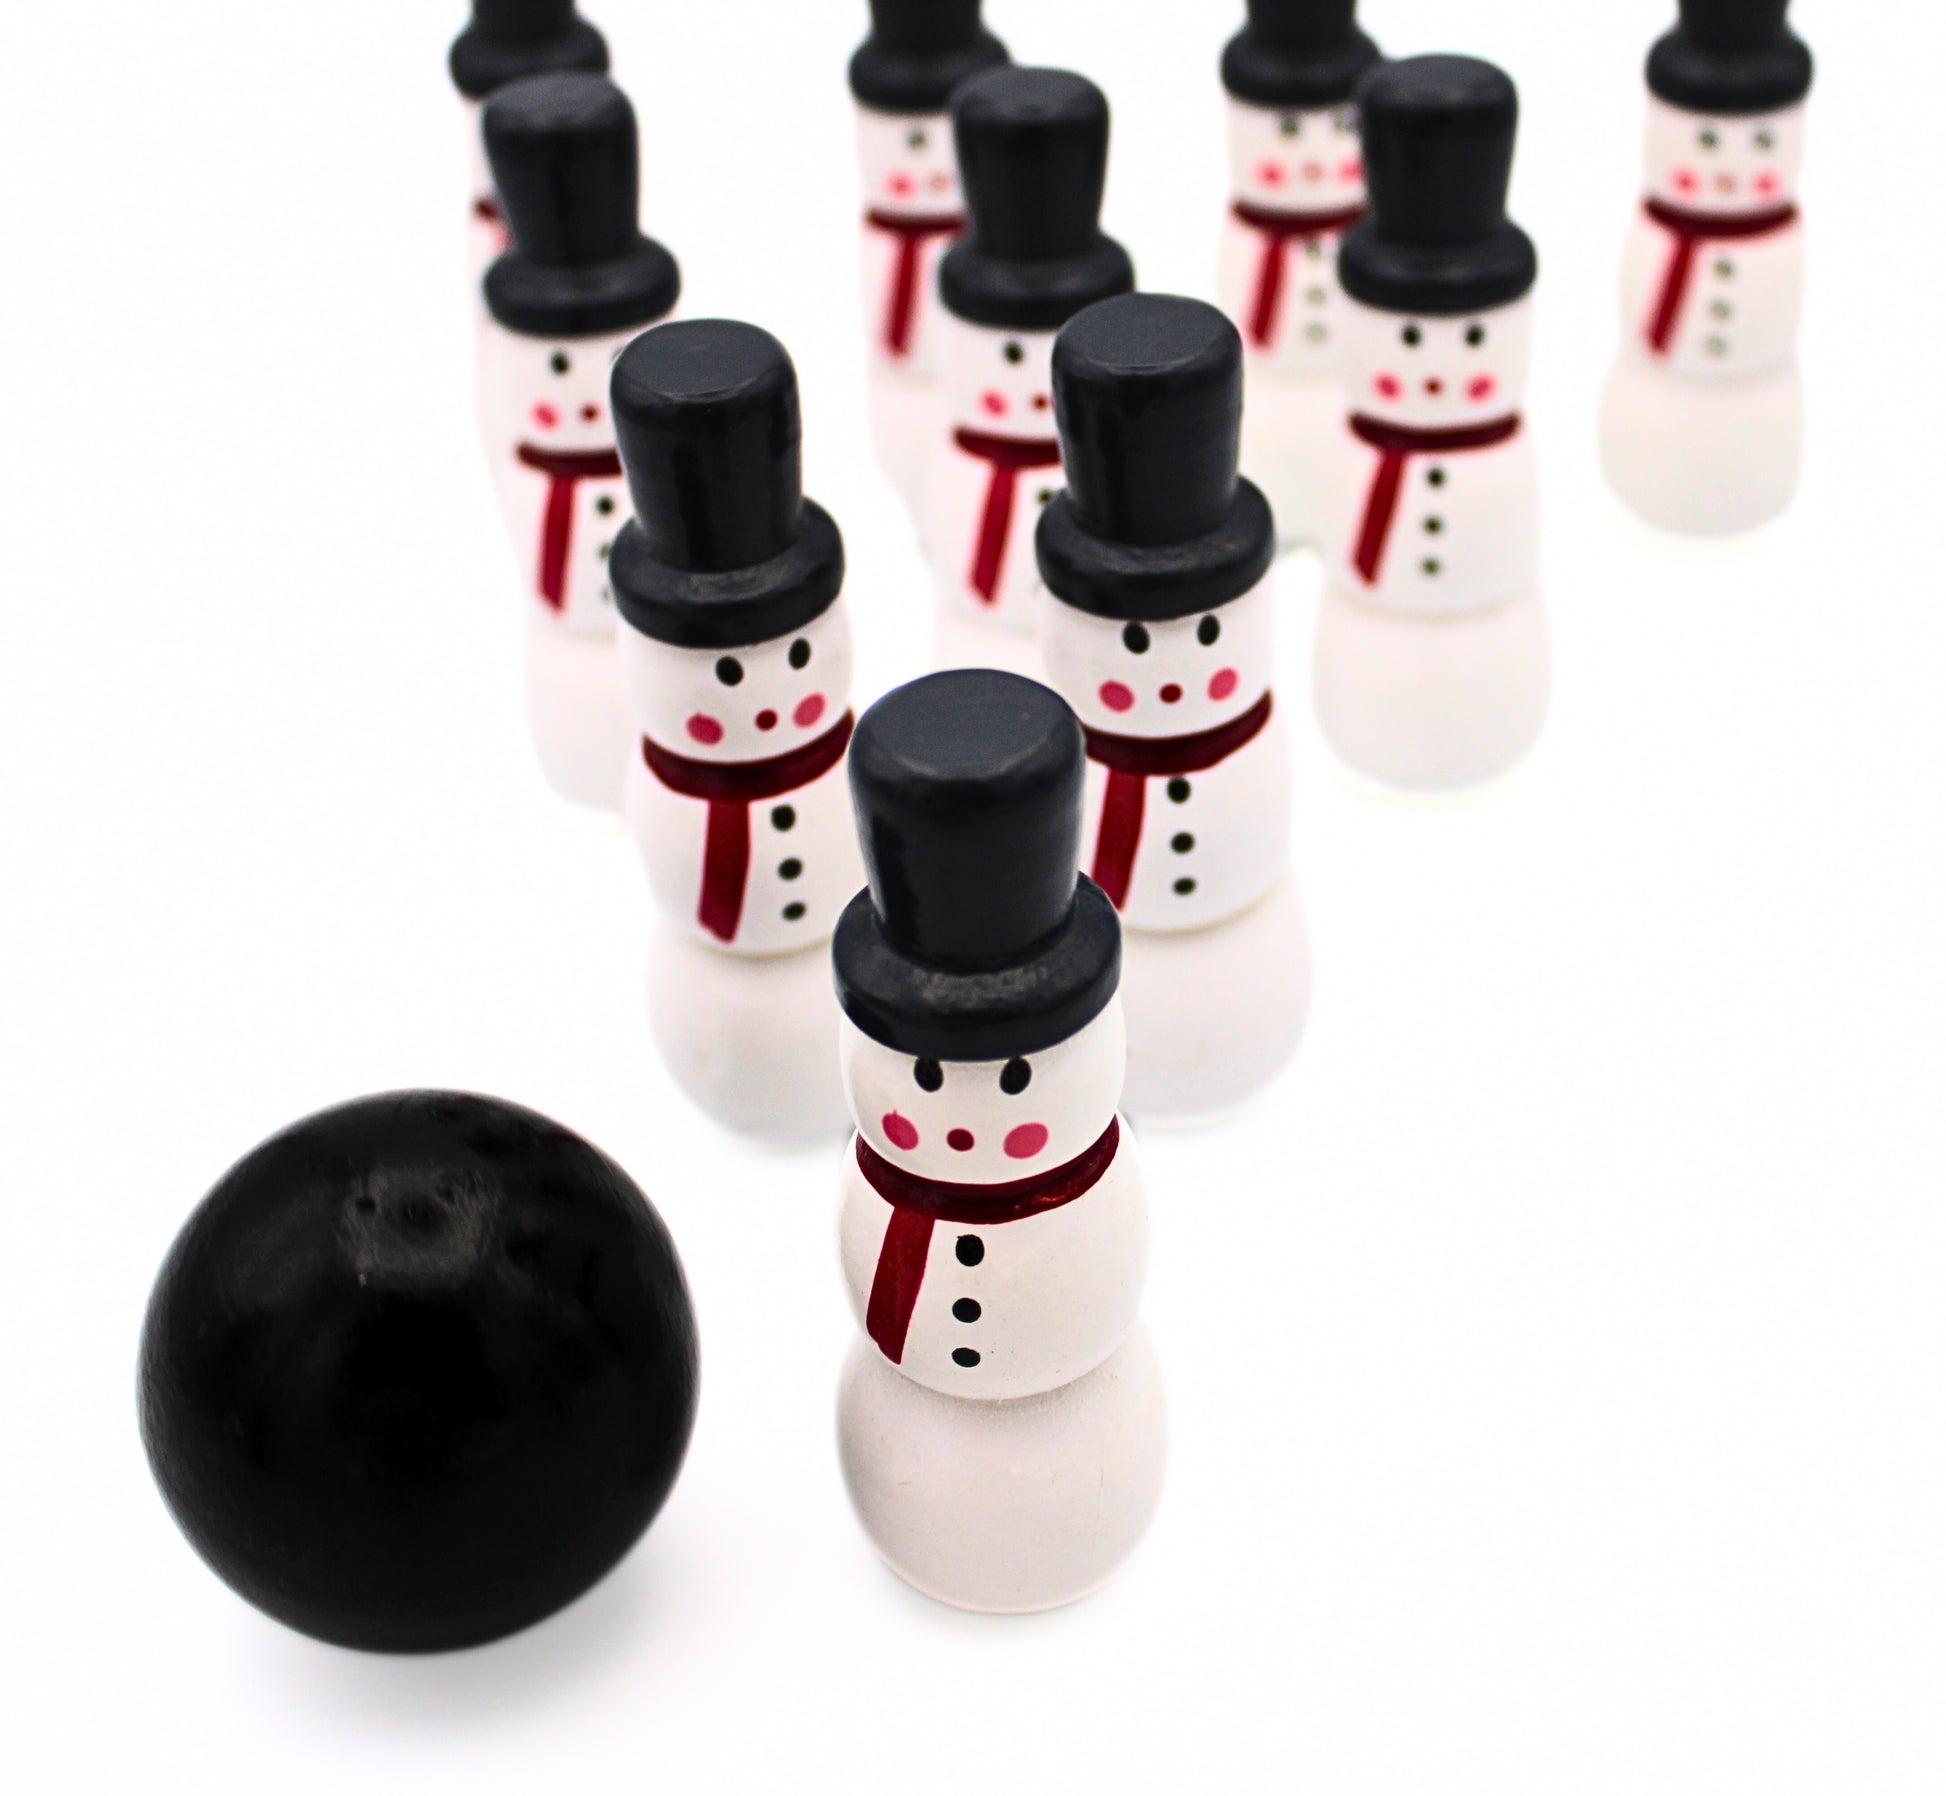 Snowman skittles and ball from Snowman Bowling Set